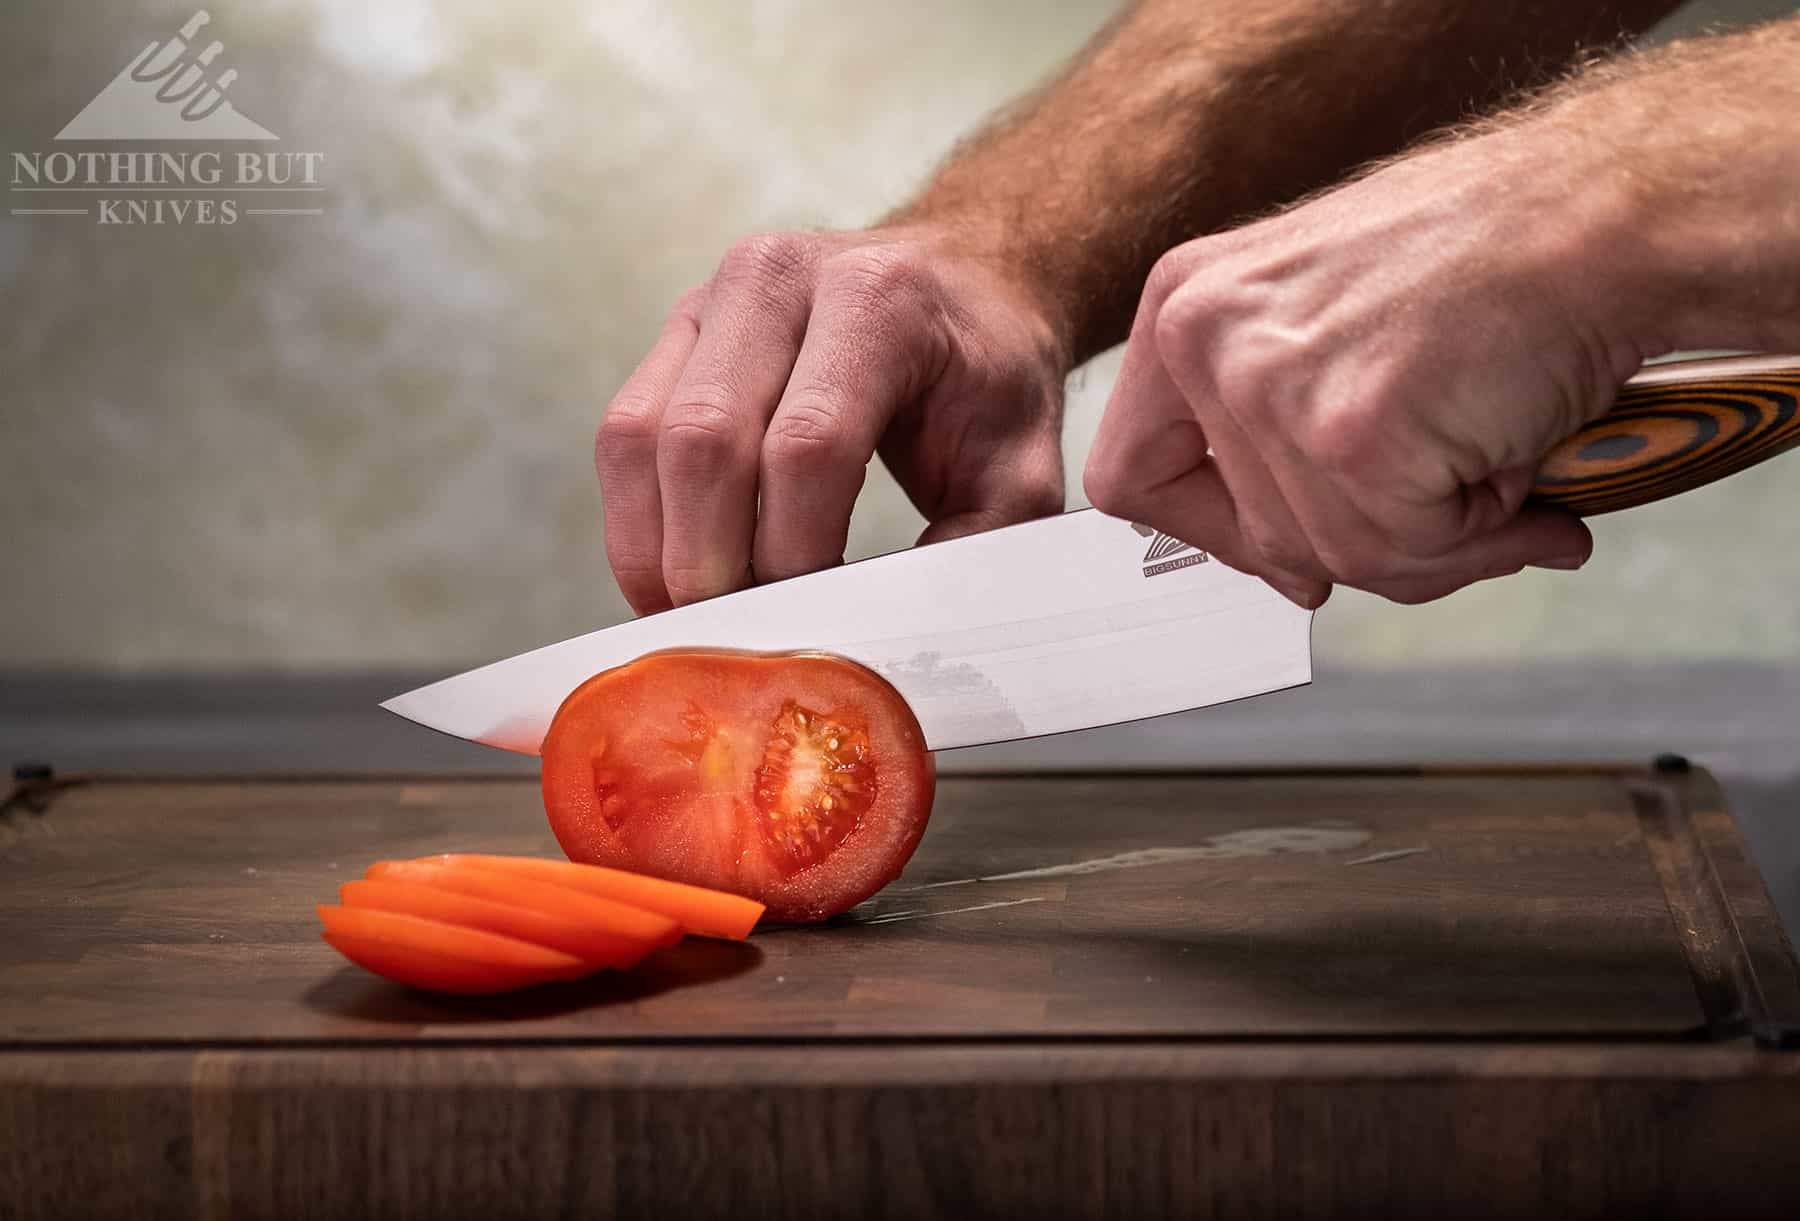 10 Best Knife Sets You Can Buy For Under $100 — Eat This Not That